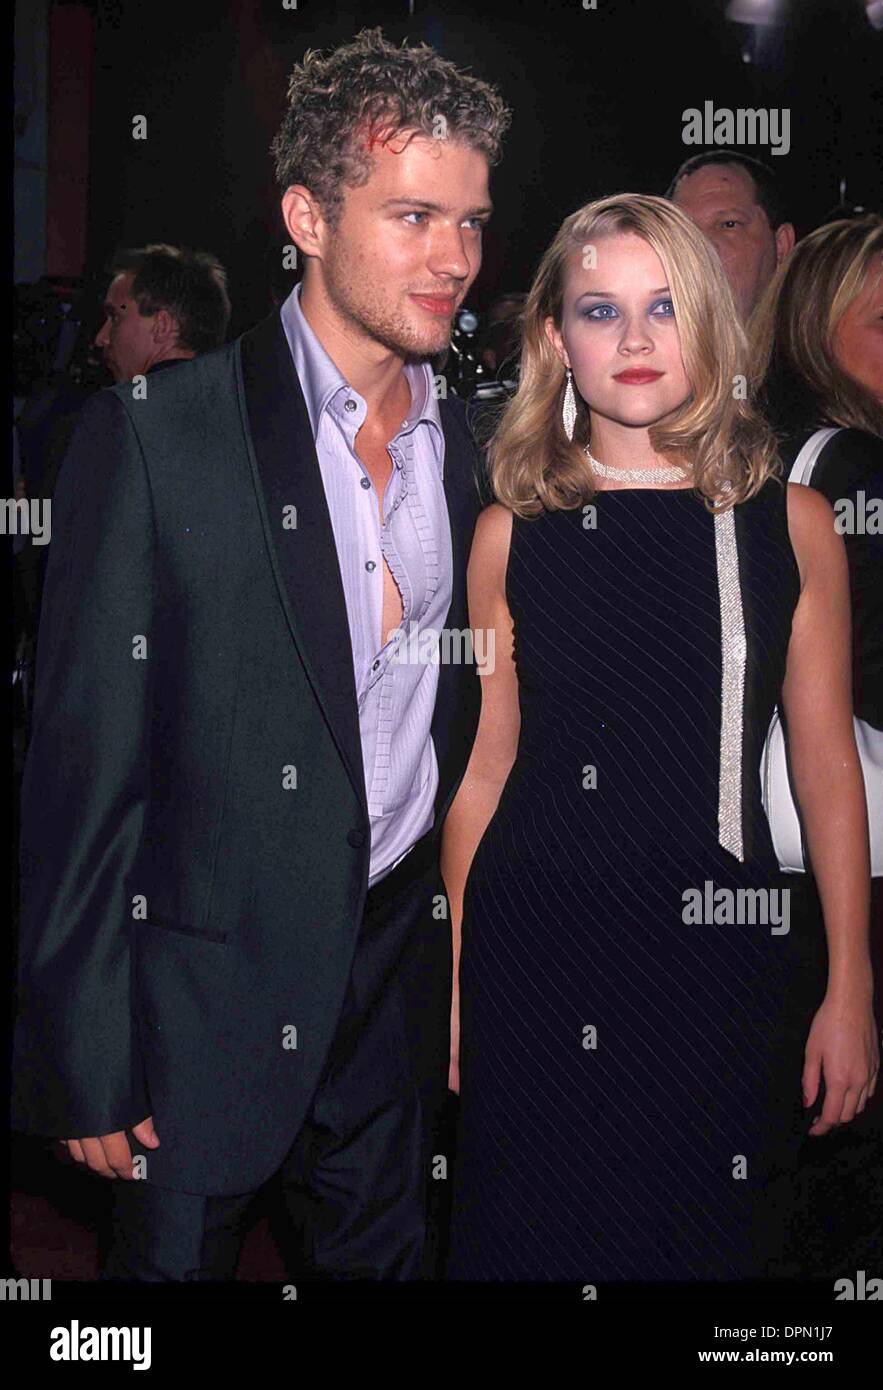 Mar. 10, 2006 - REESE WITHERSPOON WITH RYAN PHILLIPPE.''54'' PREMIERE IN HOLLYWOOD , CALIFORNIA 08-24-1998.K13083LR. LISA ROSE-(Credit Image: © Globe Photos/ZUMAPRESS.com) Stock Photo